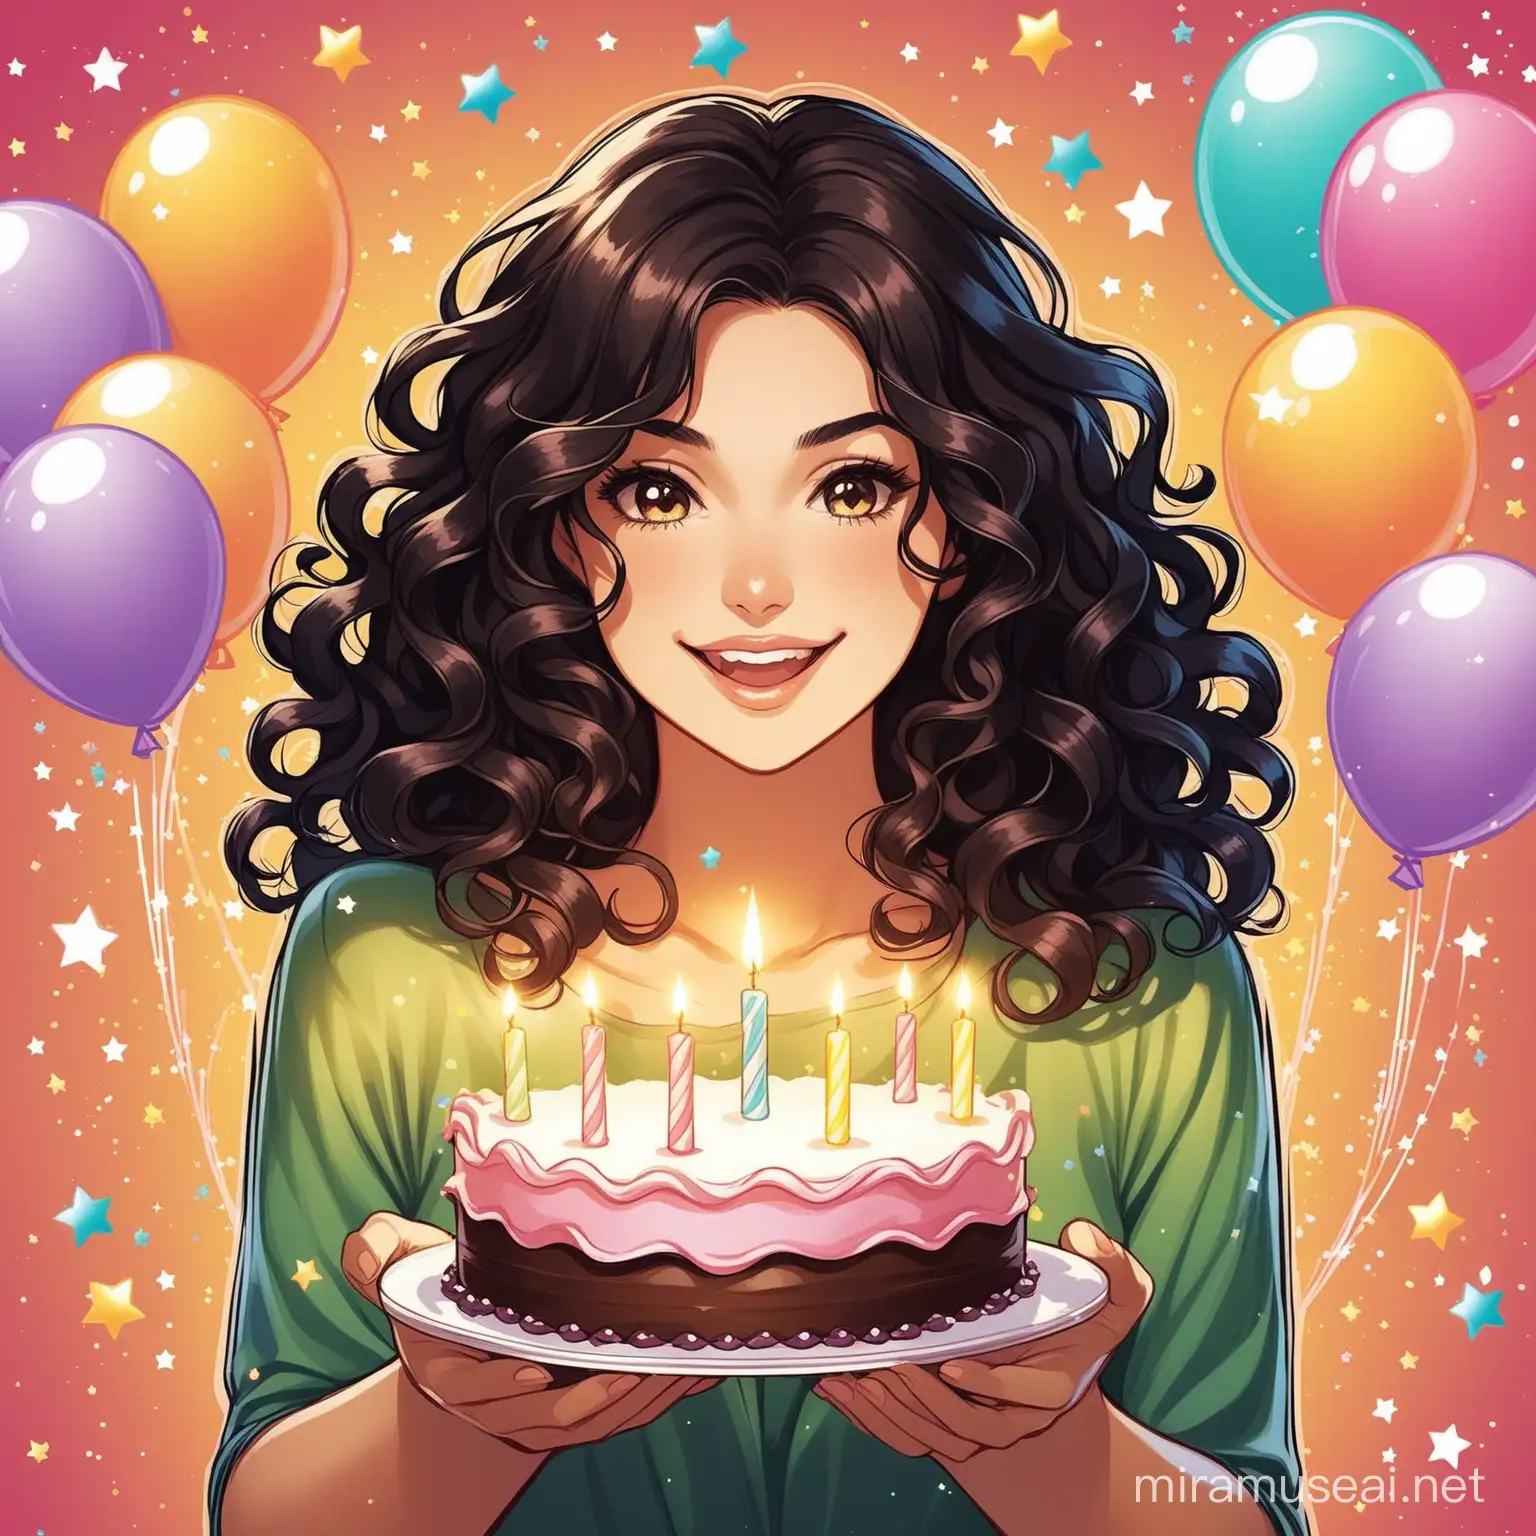 Create an image showing a dark haired woman, with curly hair, celebrating a her birthday